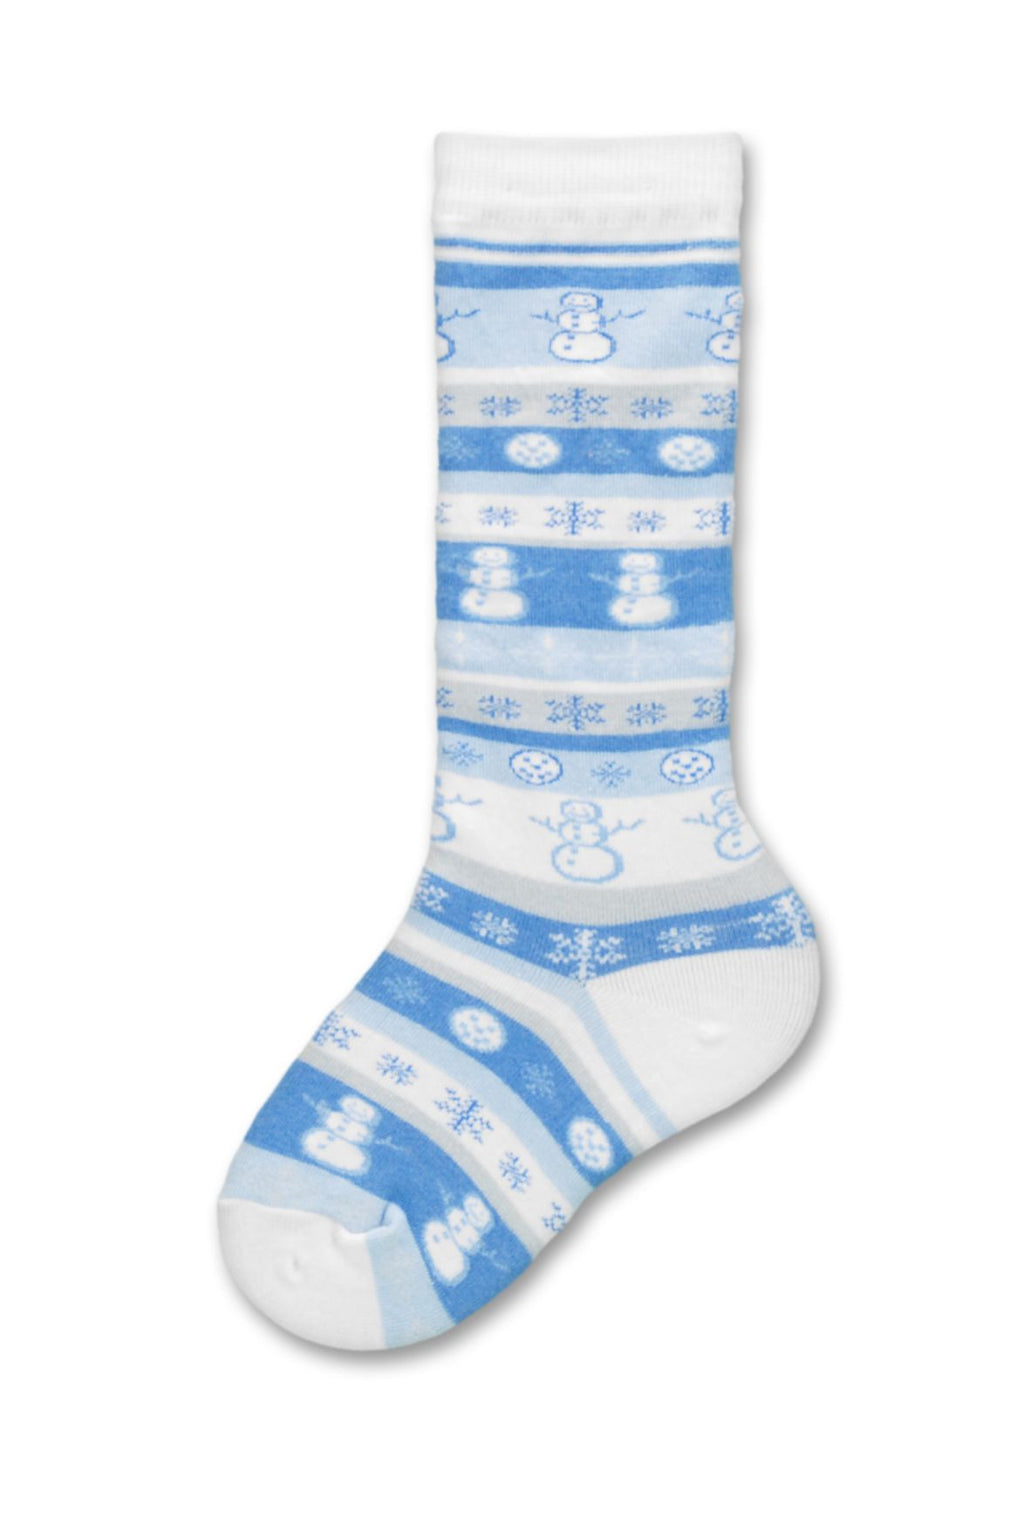 Psychabright Snowman is on a White Background with Light Blue Grey and White Stripes with Snowflakes and Snowmen in the Rows.